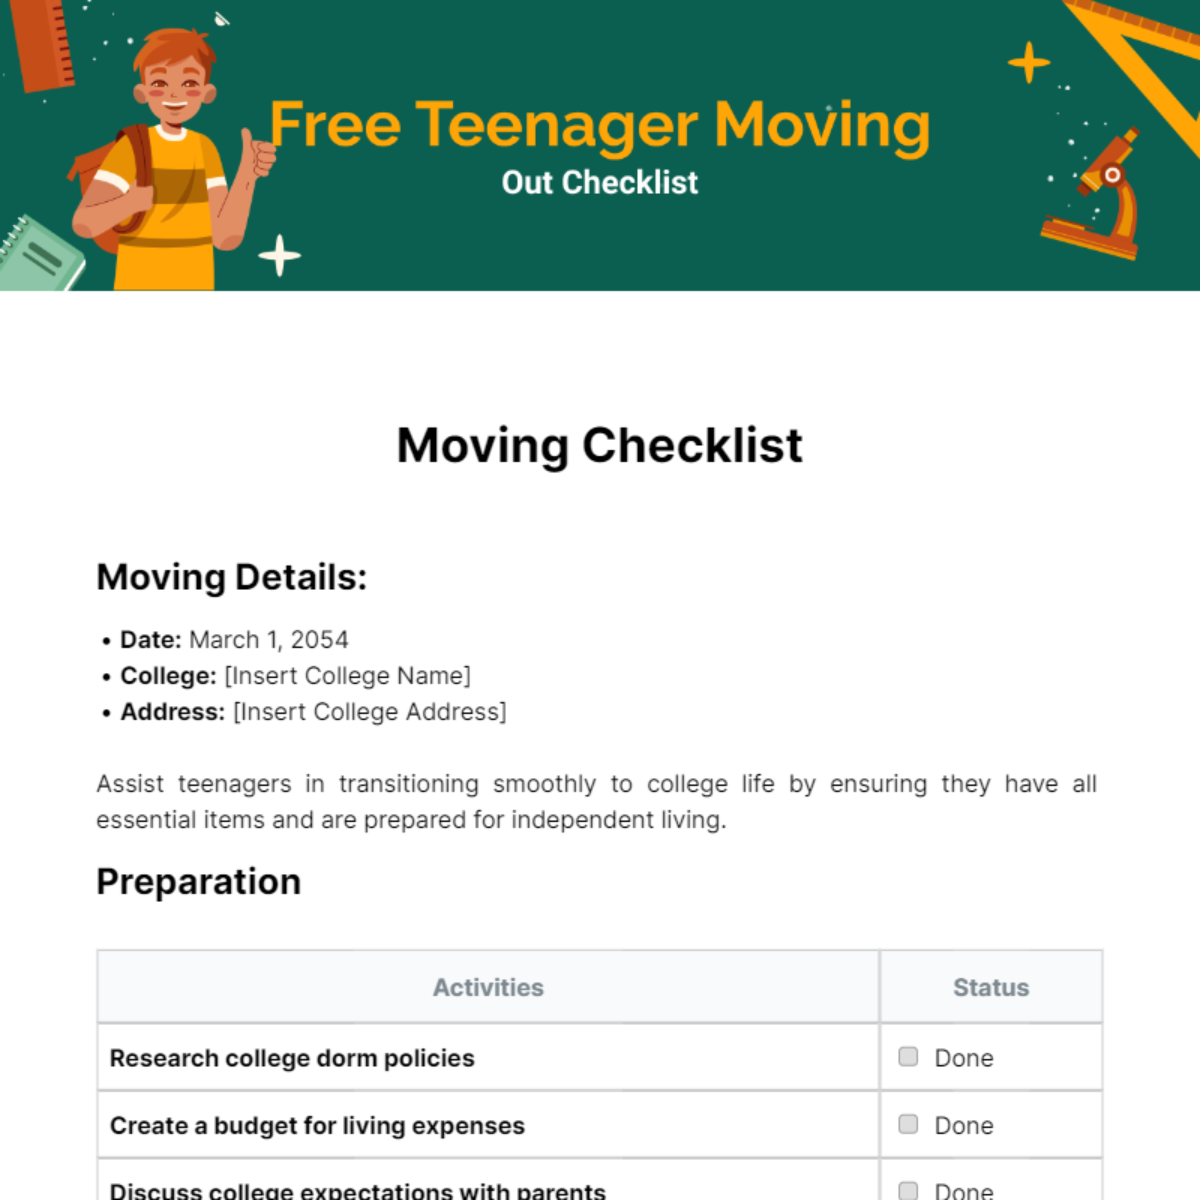 Free Teenager Moving Out Checklist Template